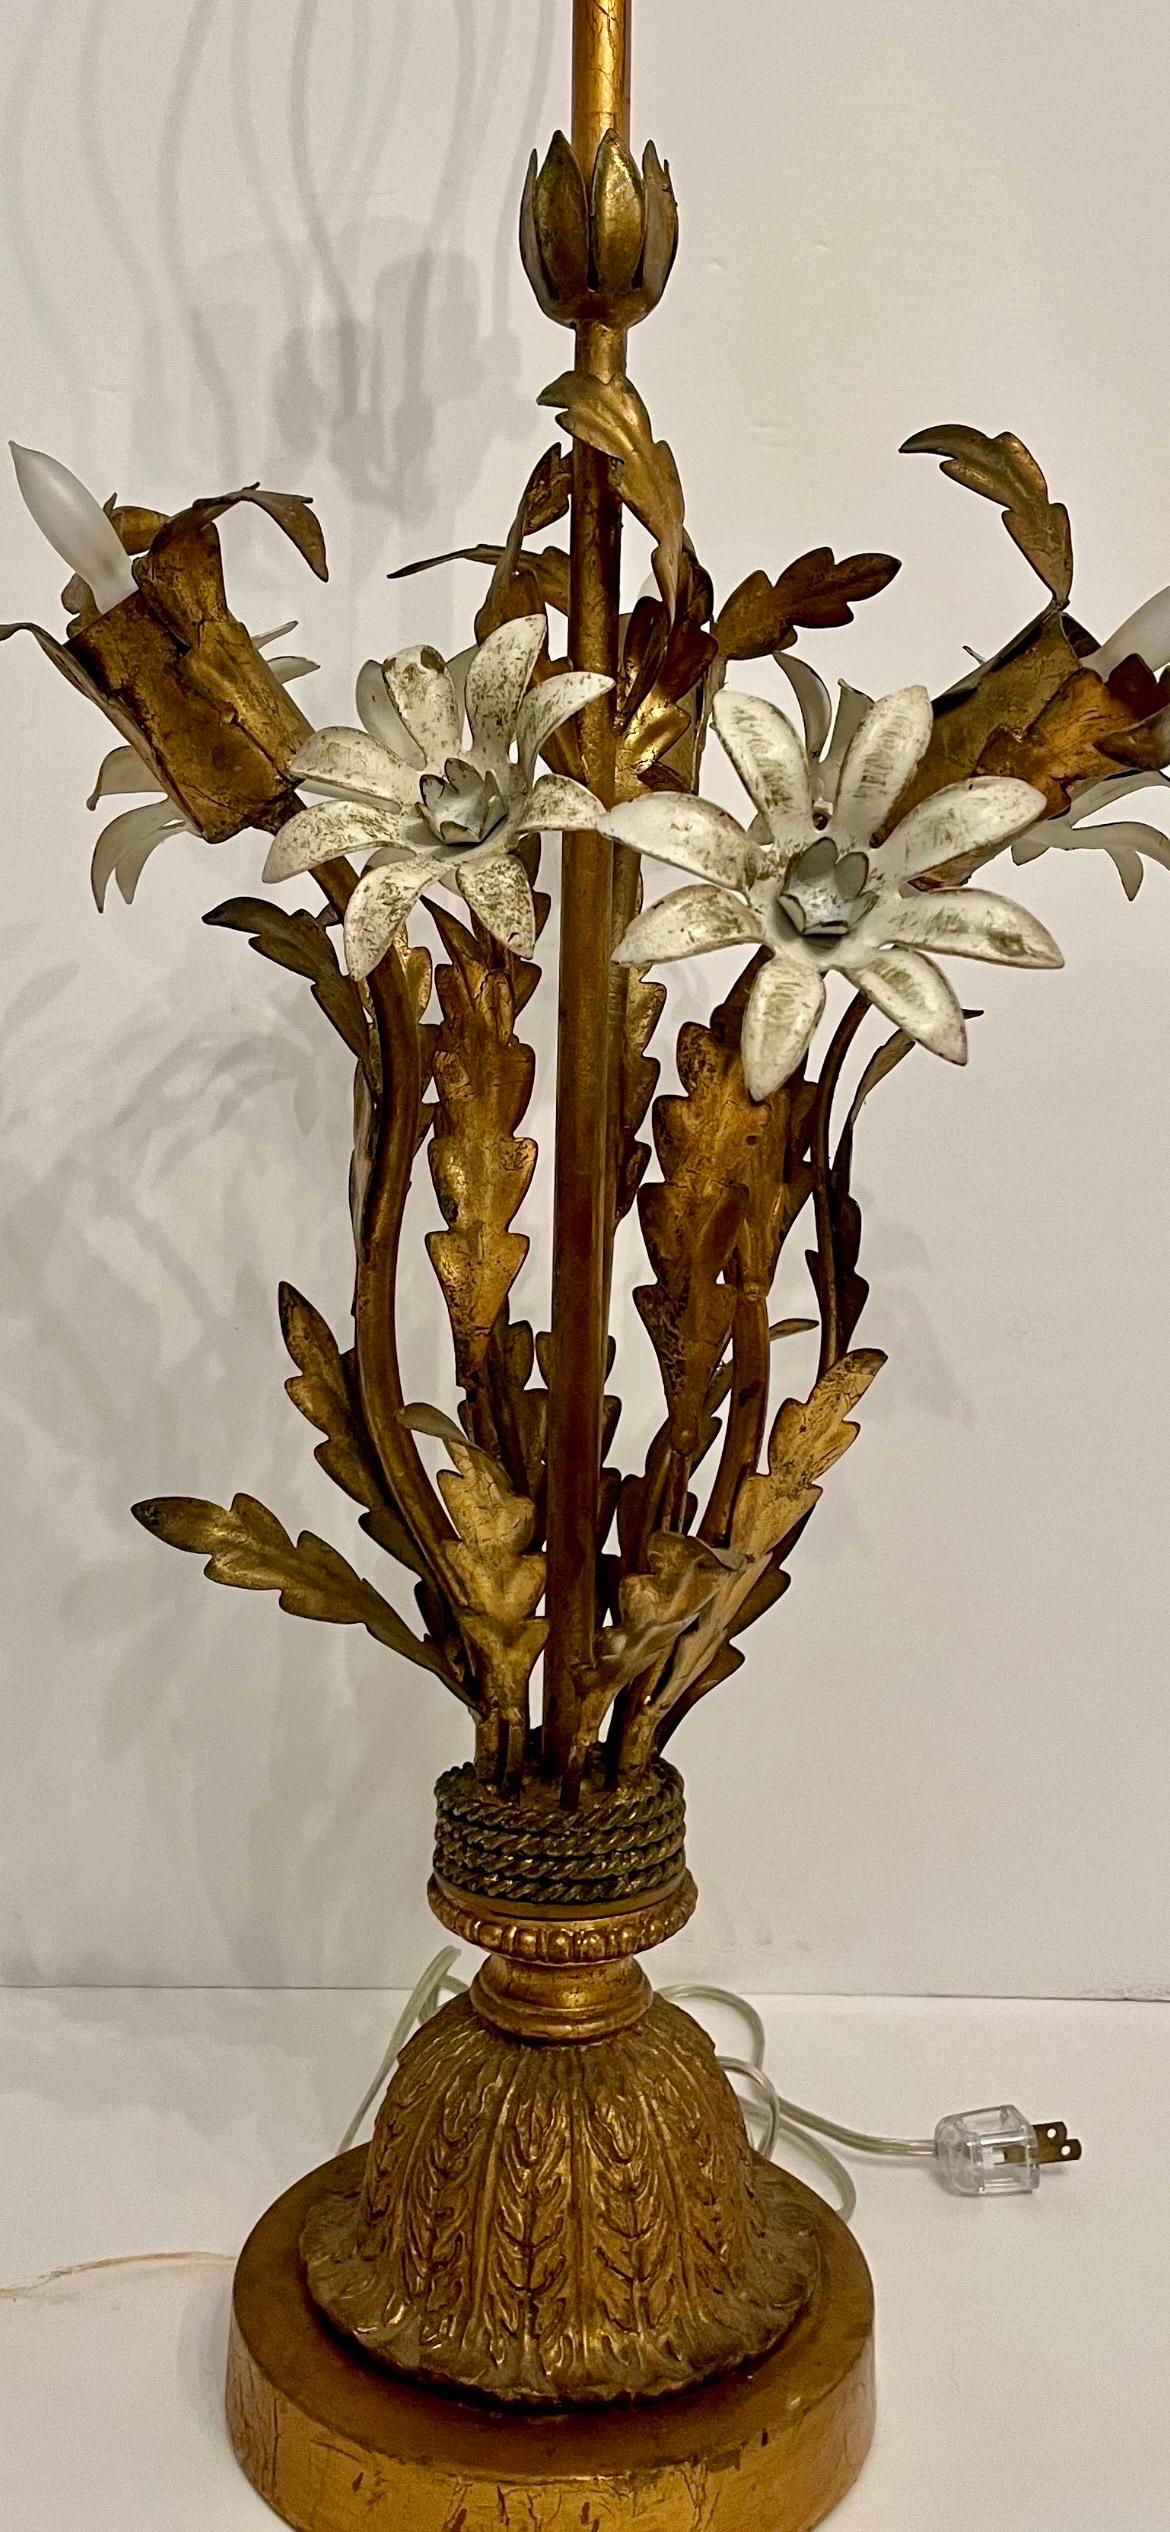 Painted gilt Italian lamp. Tole painted off white flowers and gilt leaf design lamp with single medium base socket on top with three candelabra base sockets in the flowers. Rewired with brass socket that can be switched to allow only the top bulb to